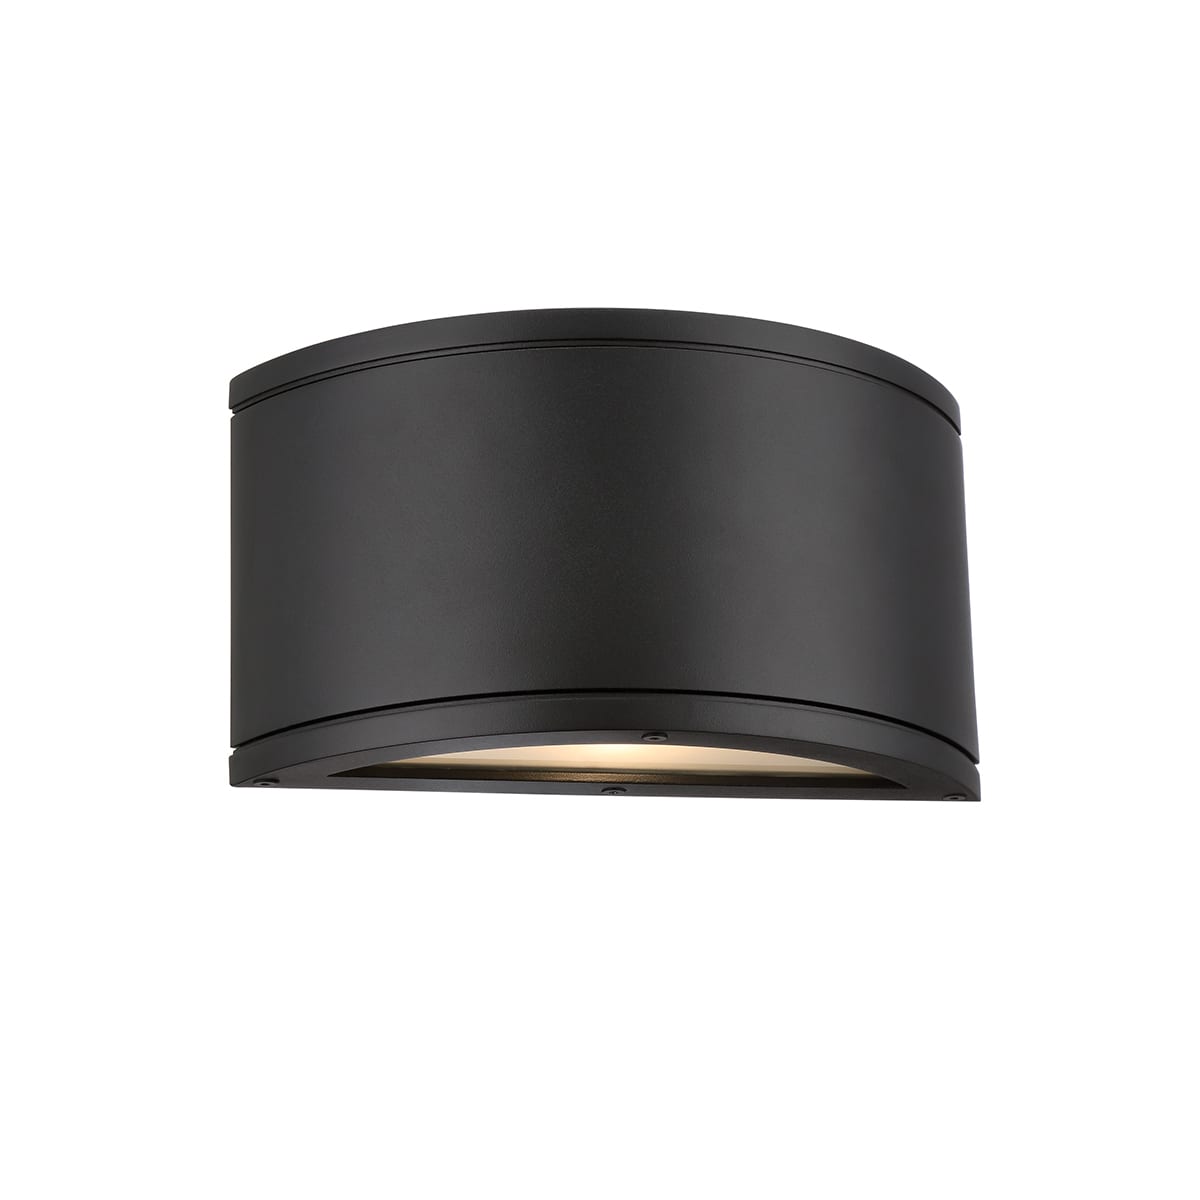 White/Brushed Aluminum WAC Lighting WS-W2610-AL Tube LED Outdoor Half Cylinder Up and Down Wall Light Fixture One Size 